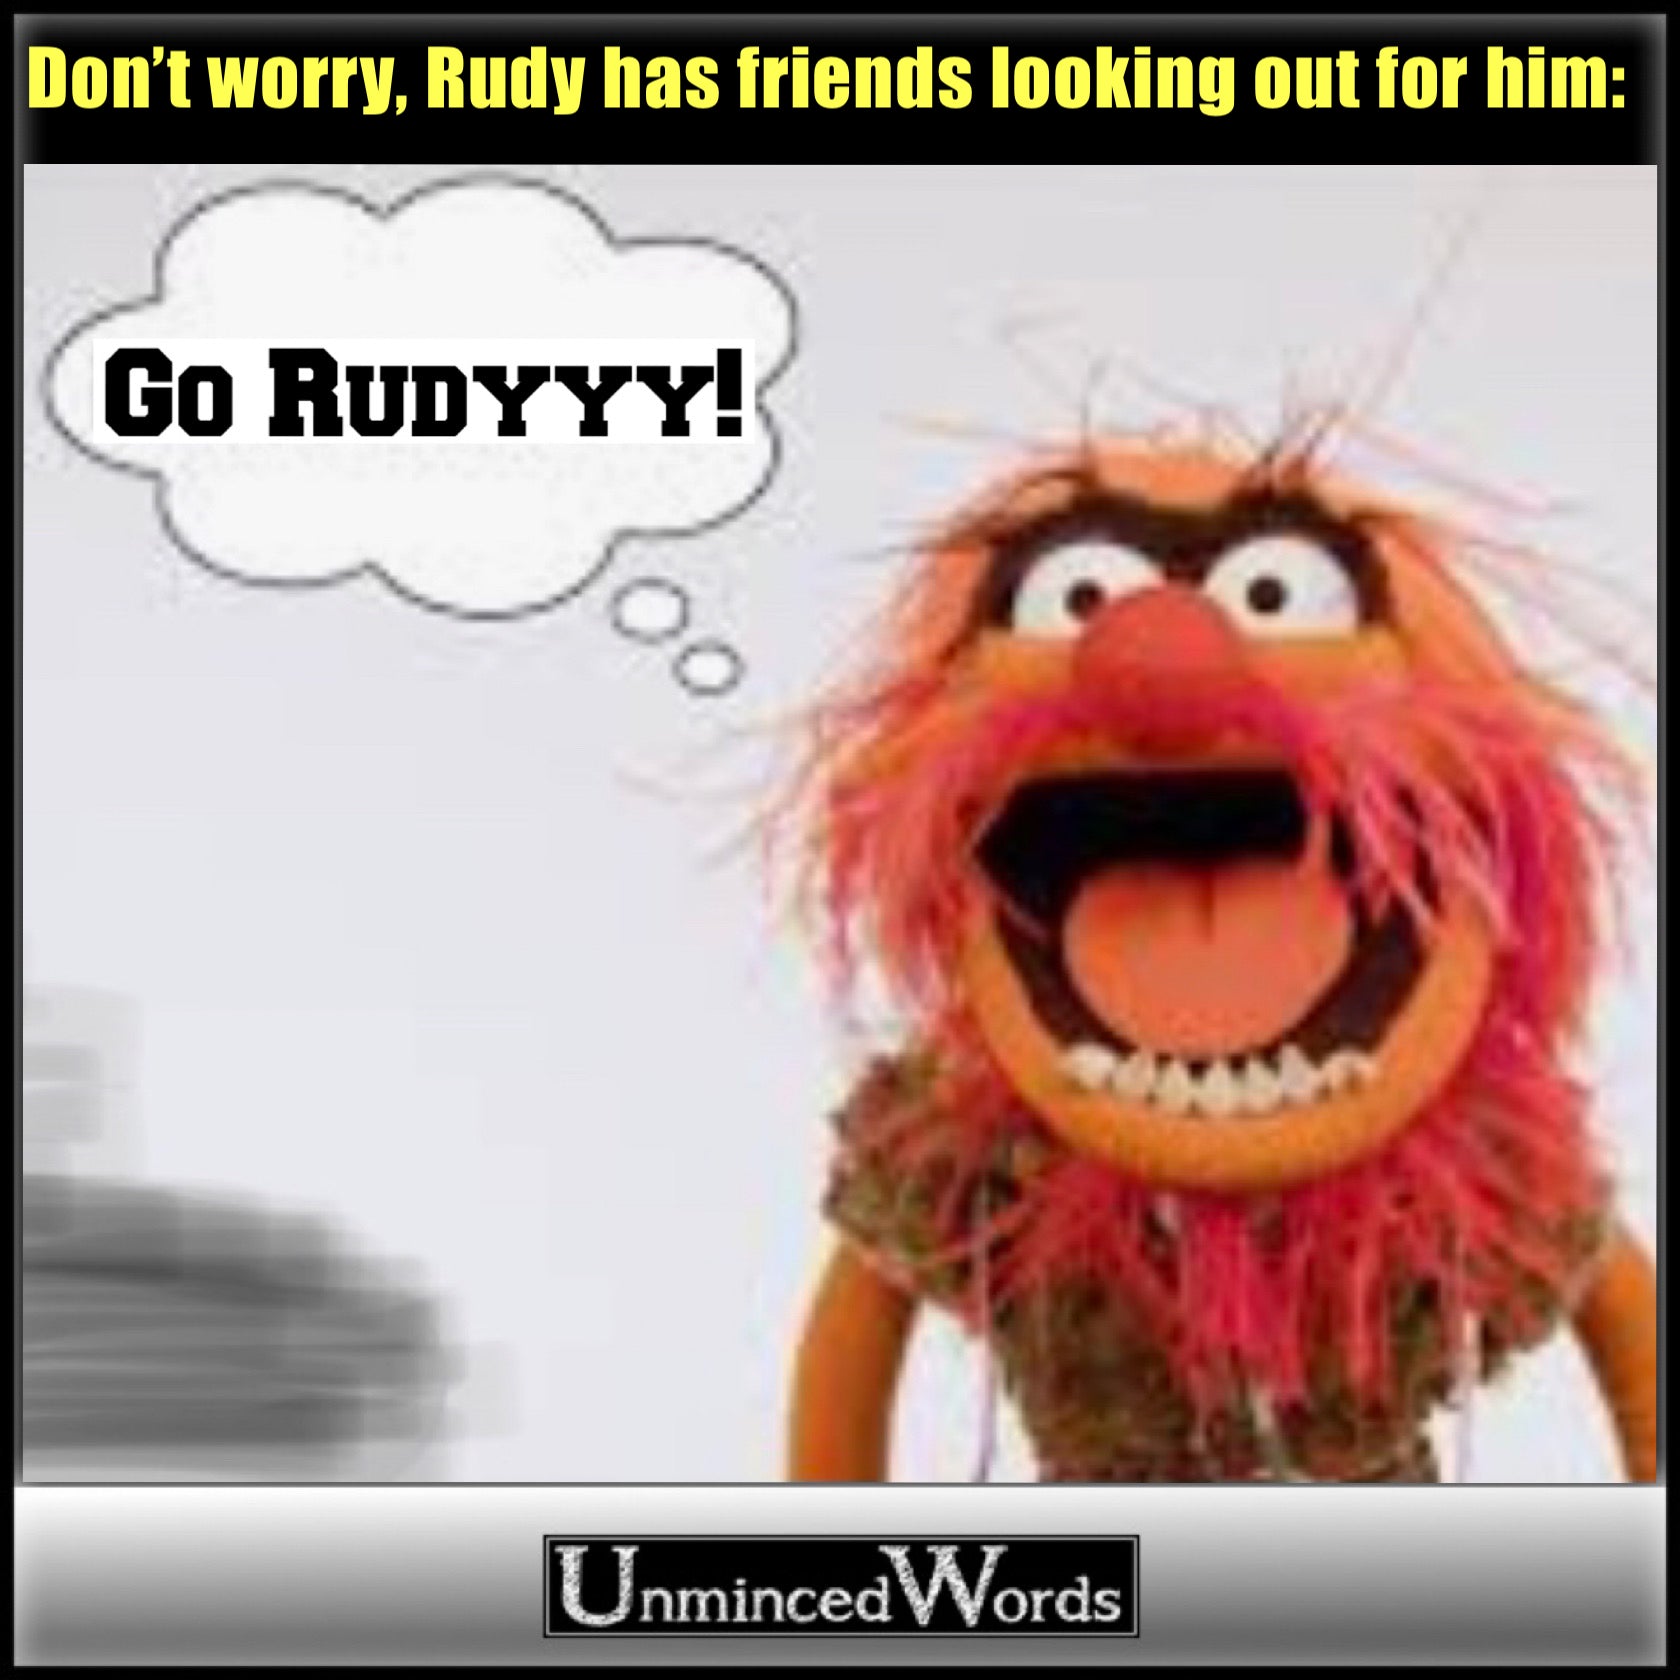 Don’t worry, Rudy has friends looking out for him.